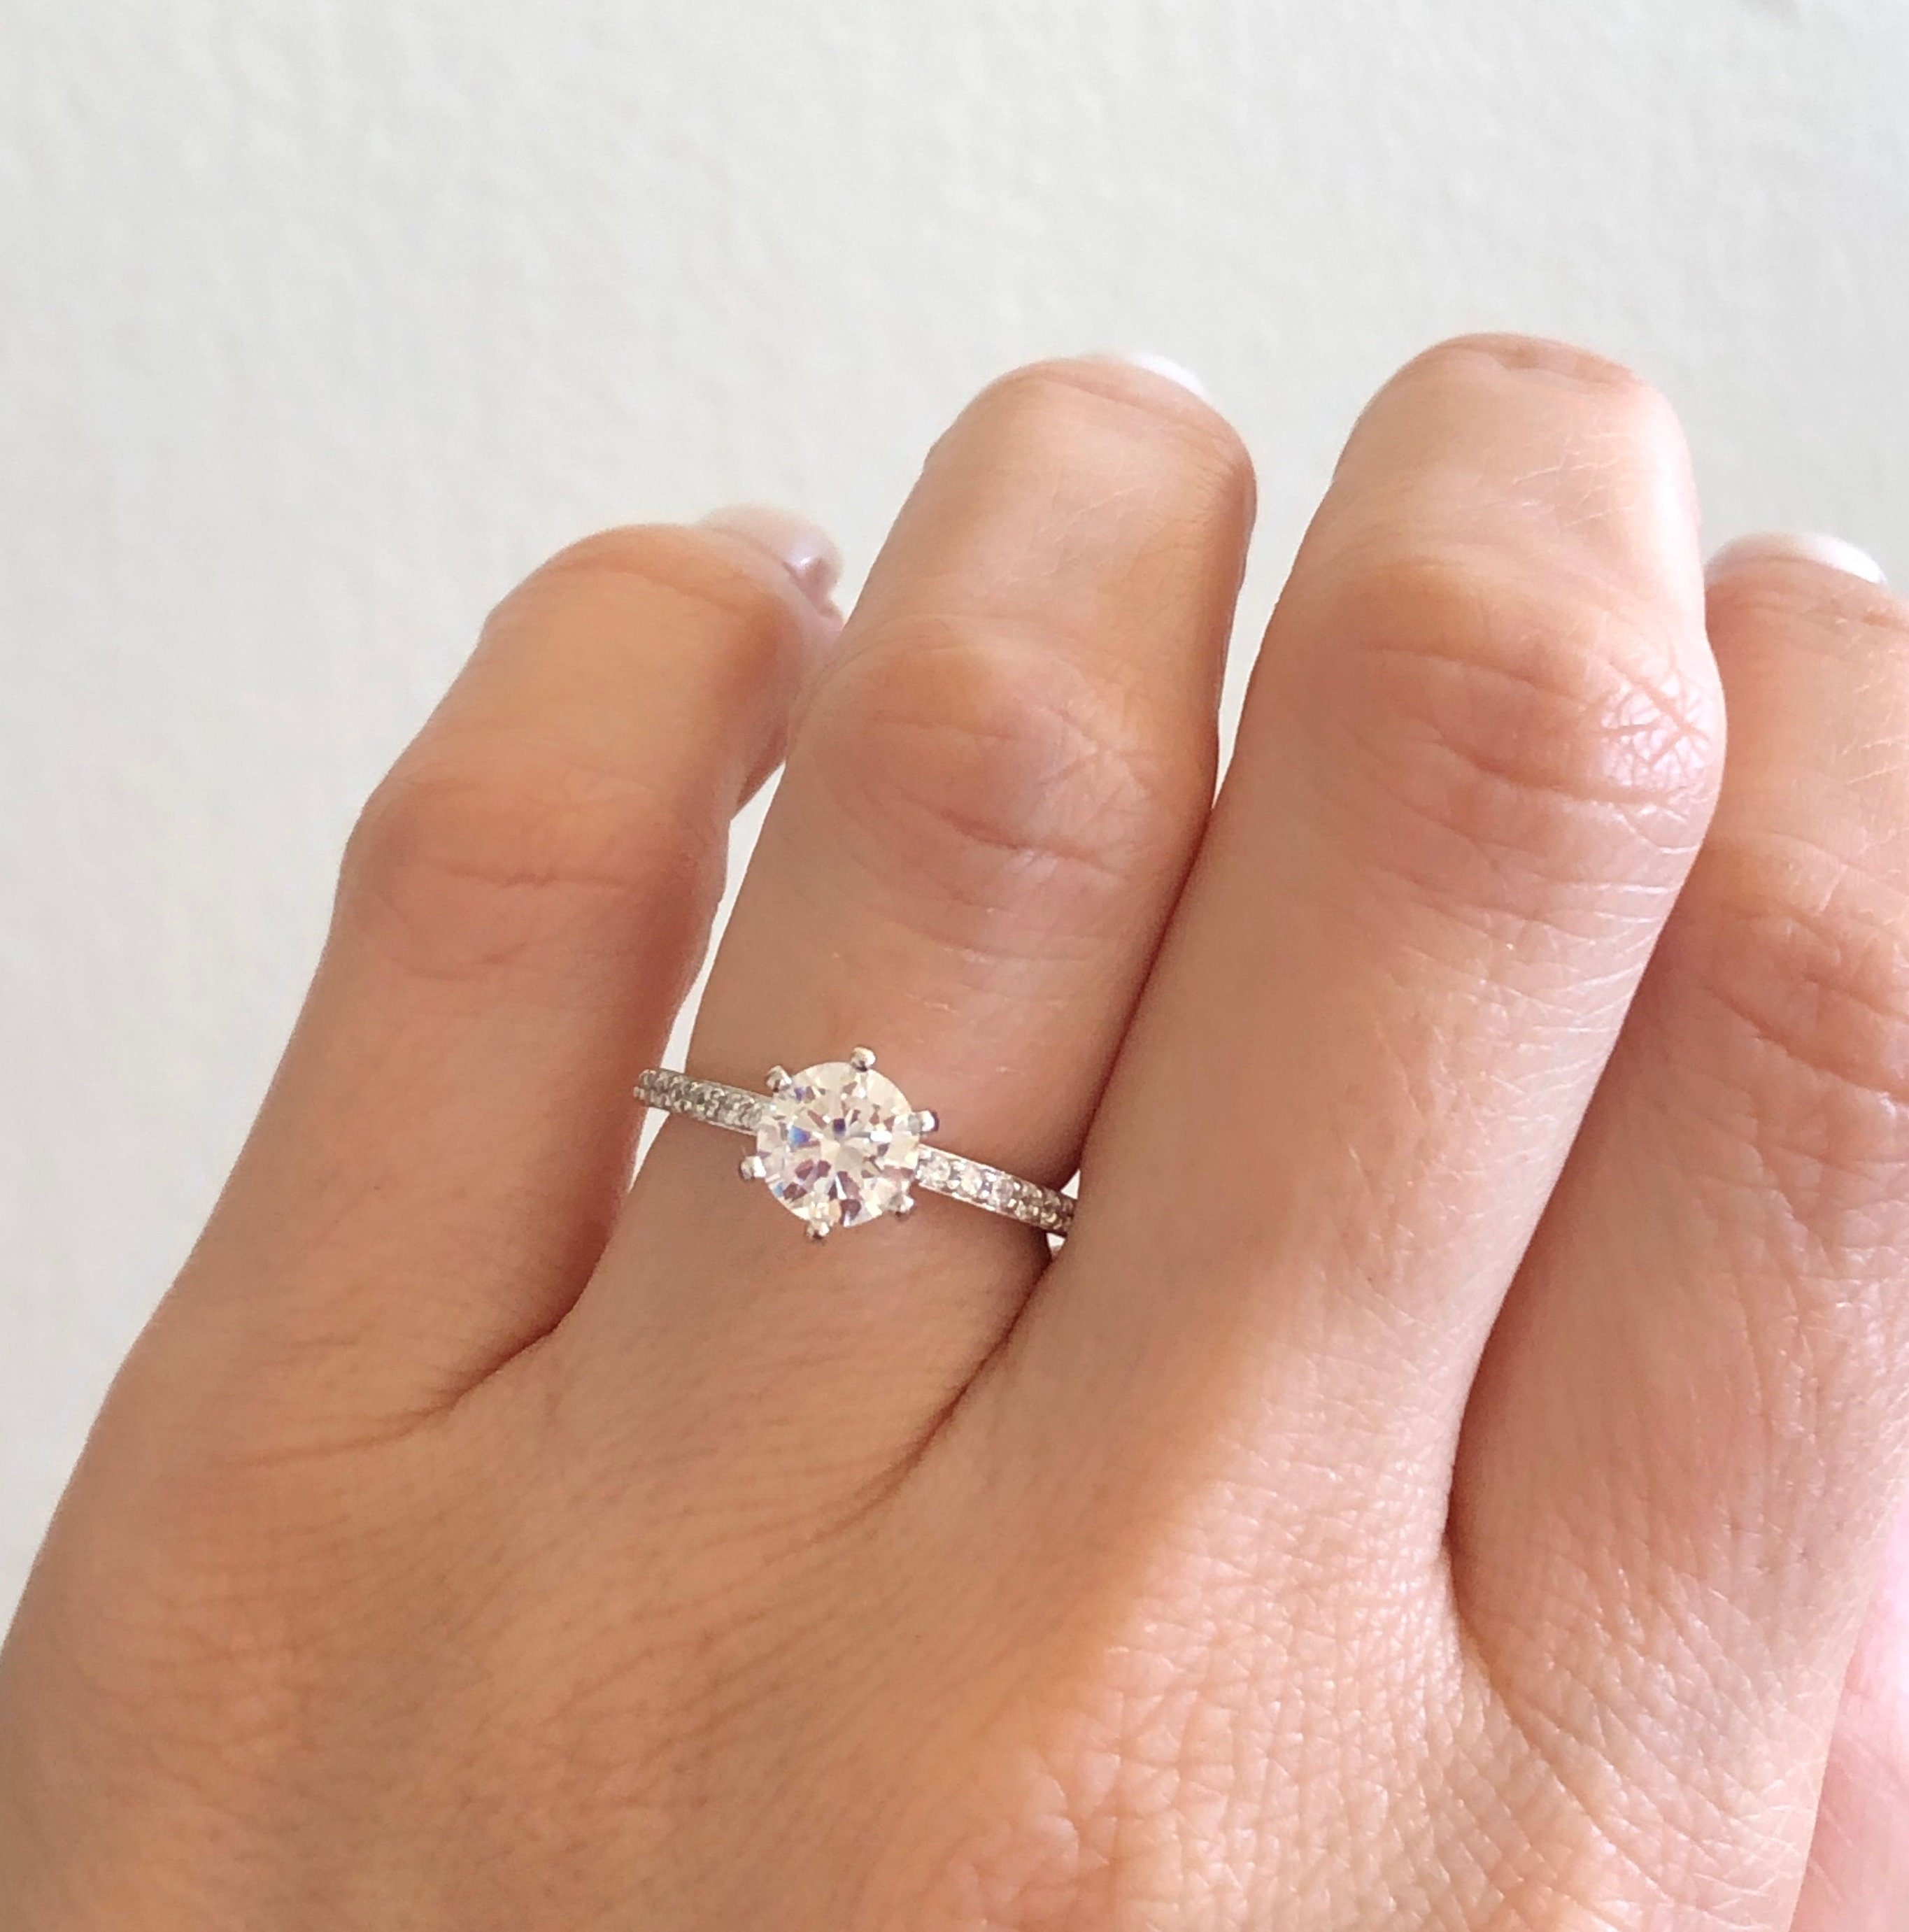 Round Diamond Engagement Rings Are Classic❤️ The optimal brilliant cut  round diamond will create 58 facets. These facets allow for ma... |  Instagram